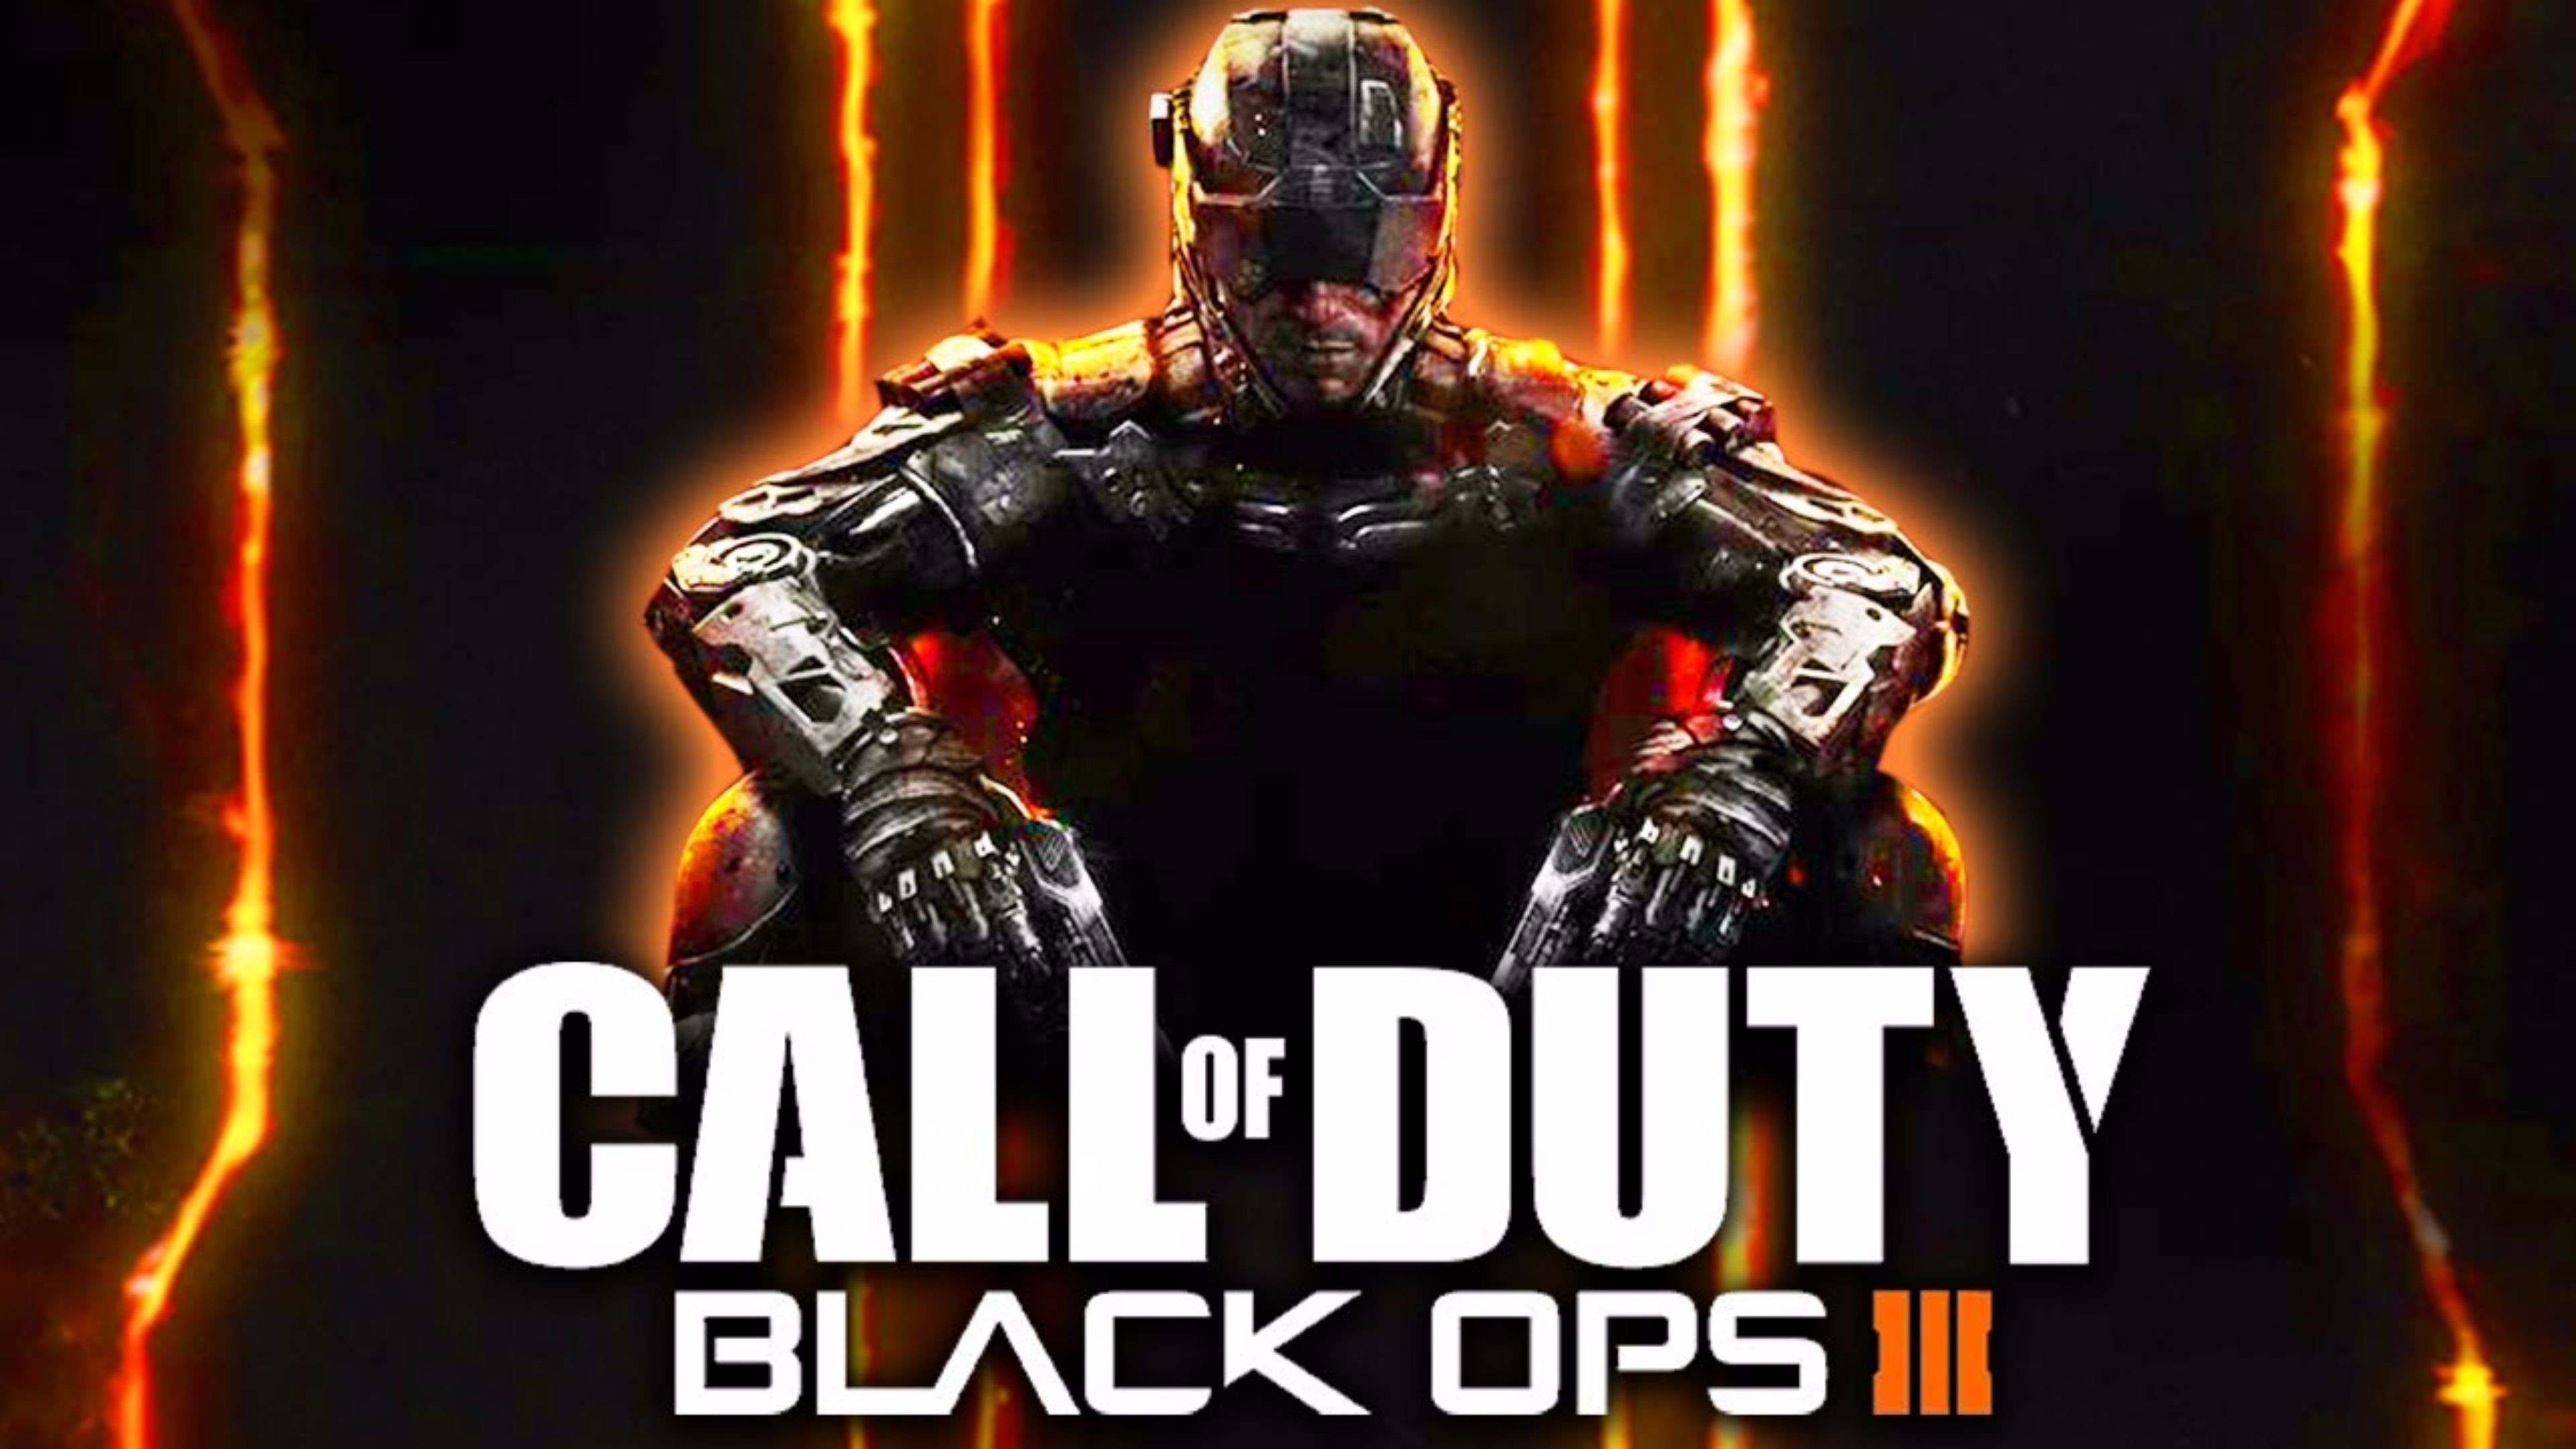 3840x2160 Download Free Call of Duty Black Ops 3 4K Wallpaper